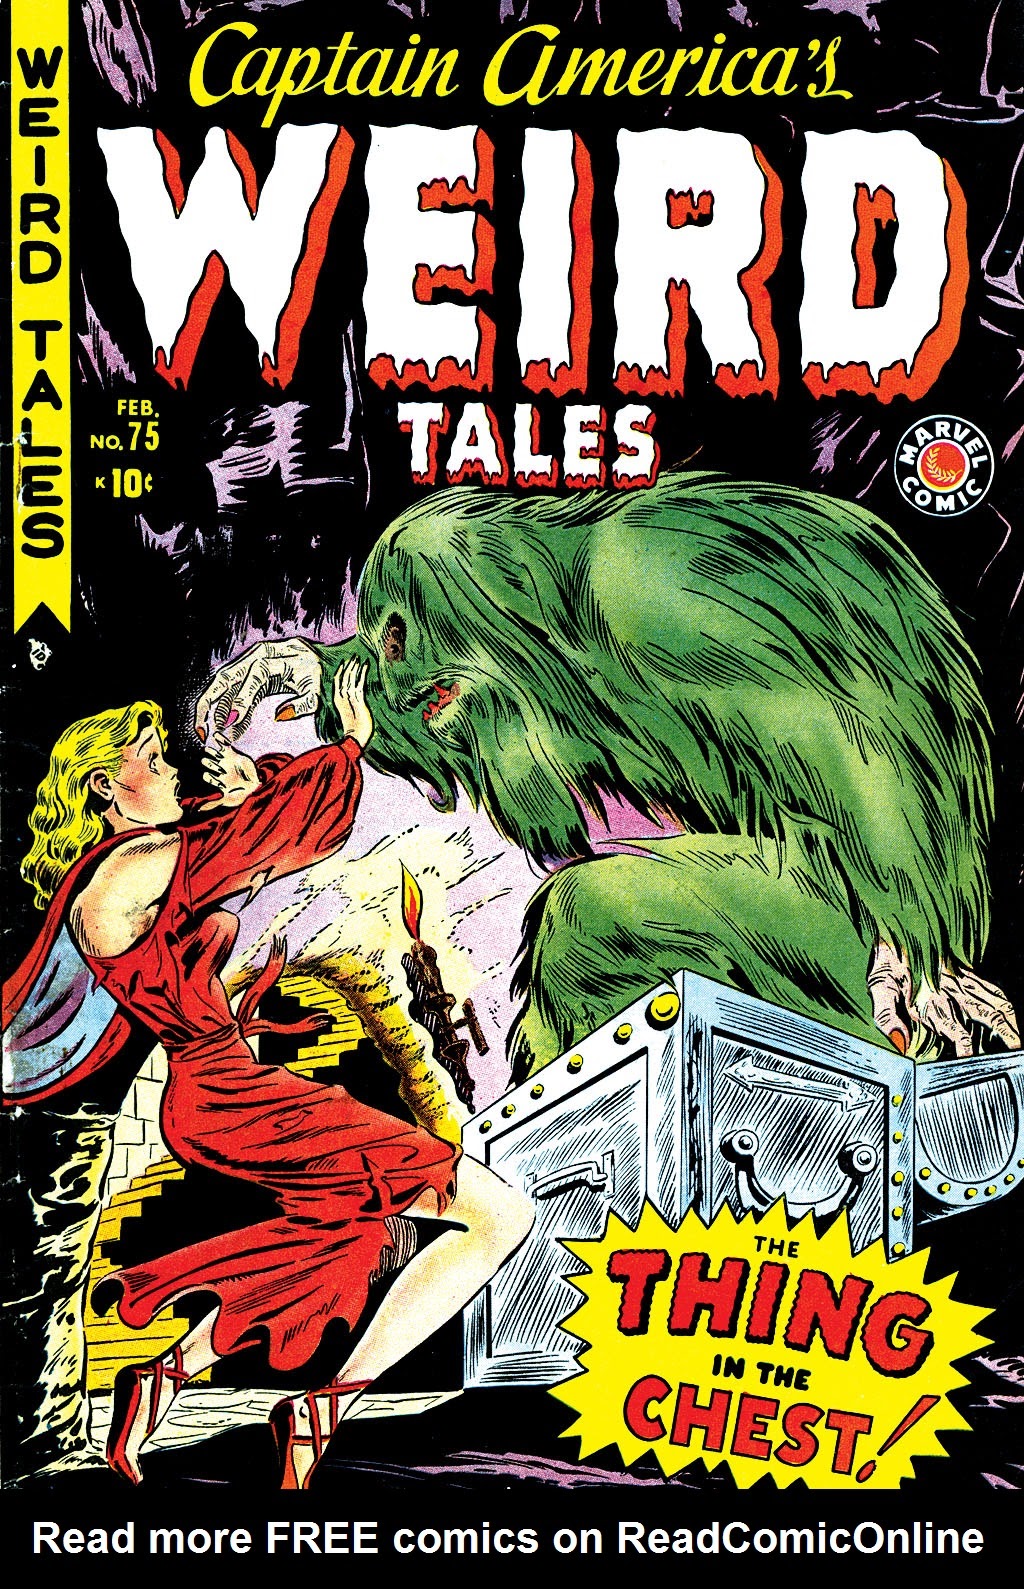 Read online Captain America's Weird Tales comic -  Issue #75 - 1